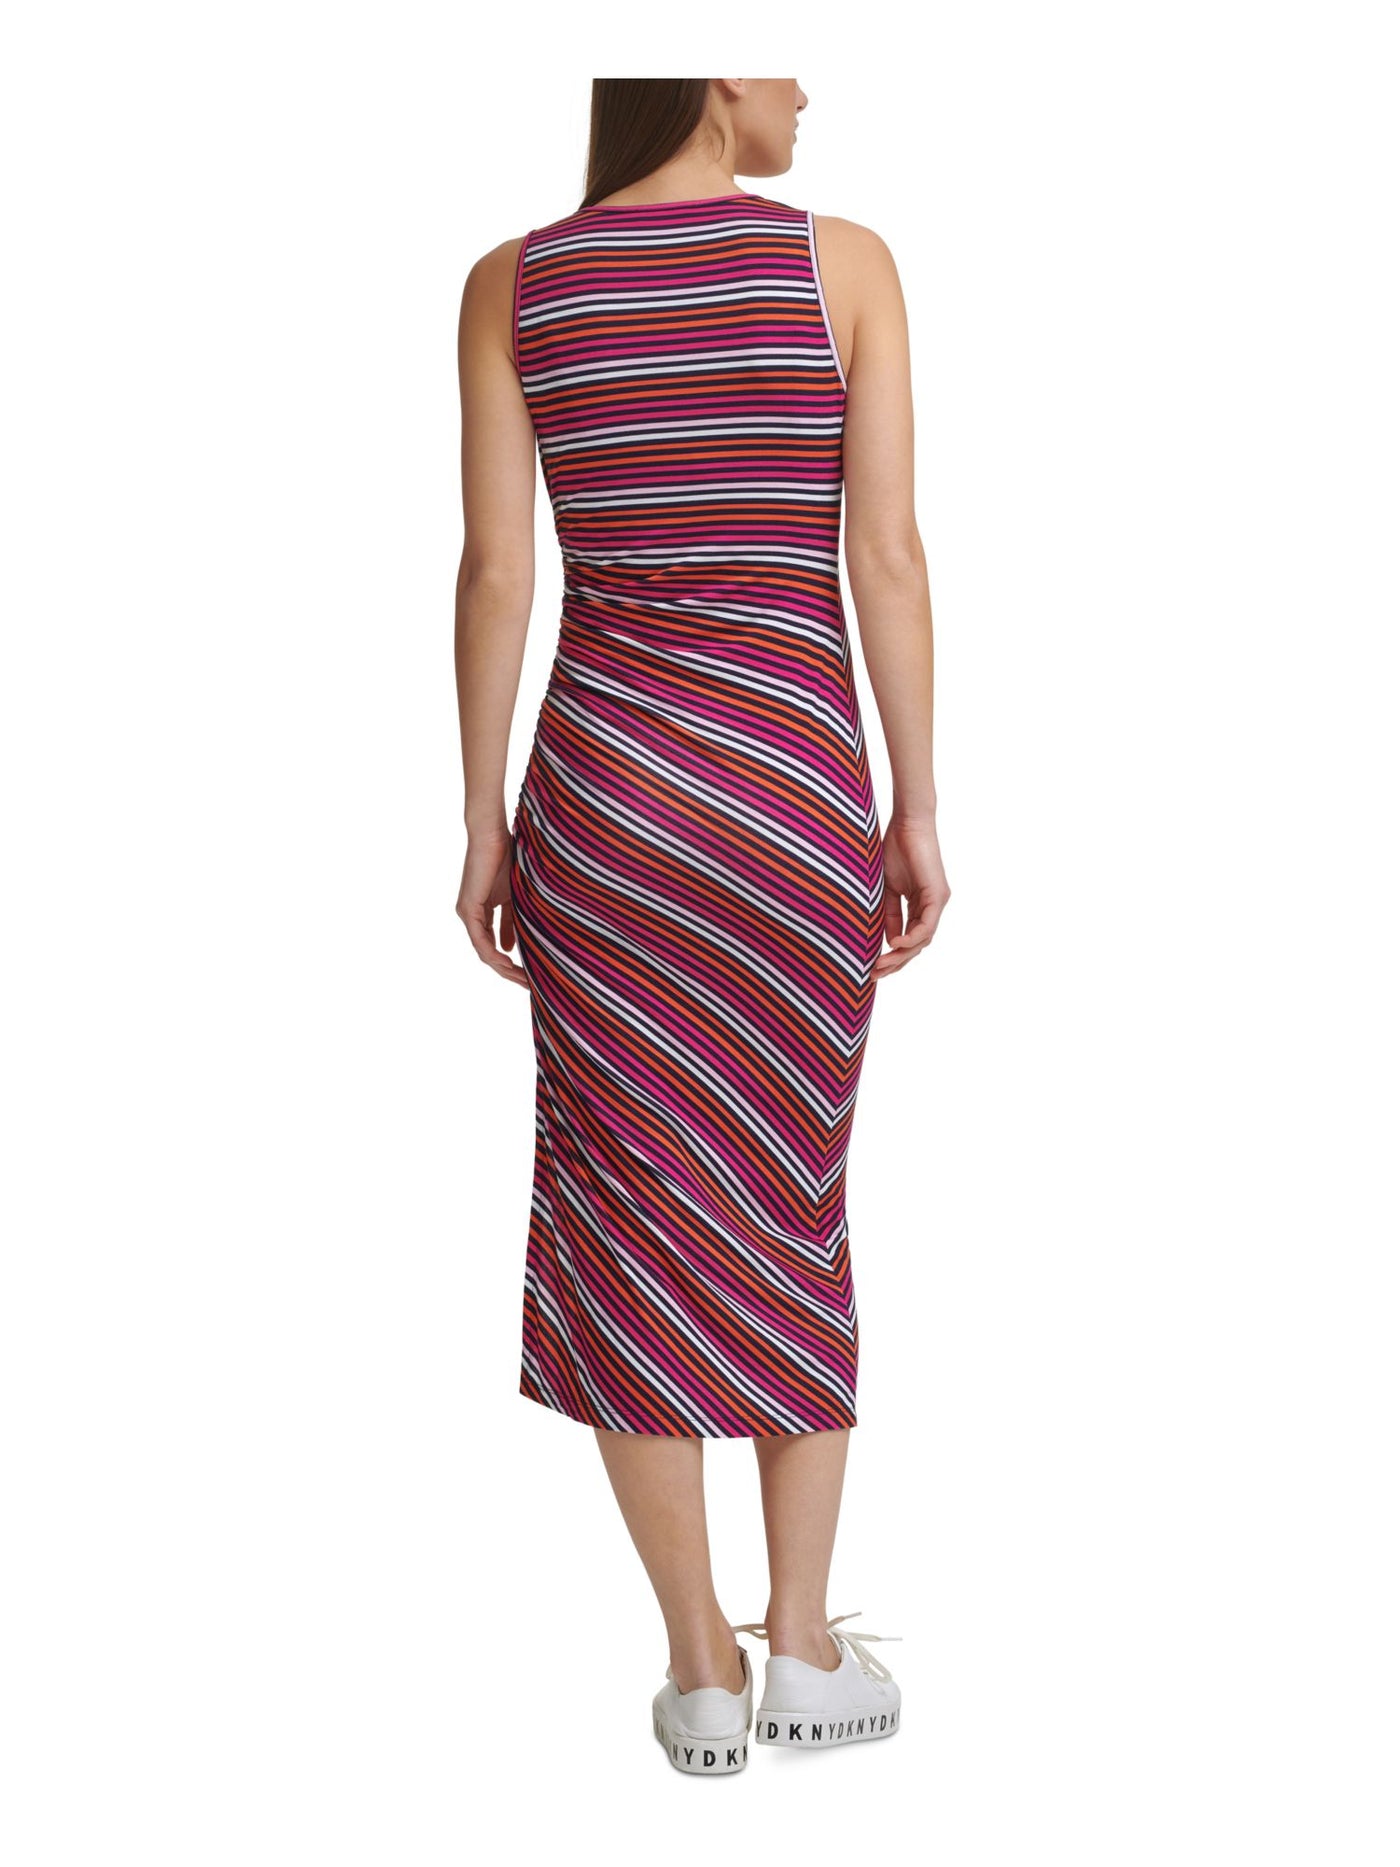 DKNY Womens Pink Stretch Ruched Slitted Striped Sleeveless Scoop Neck Midi Wear To Work Sheath Dress M